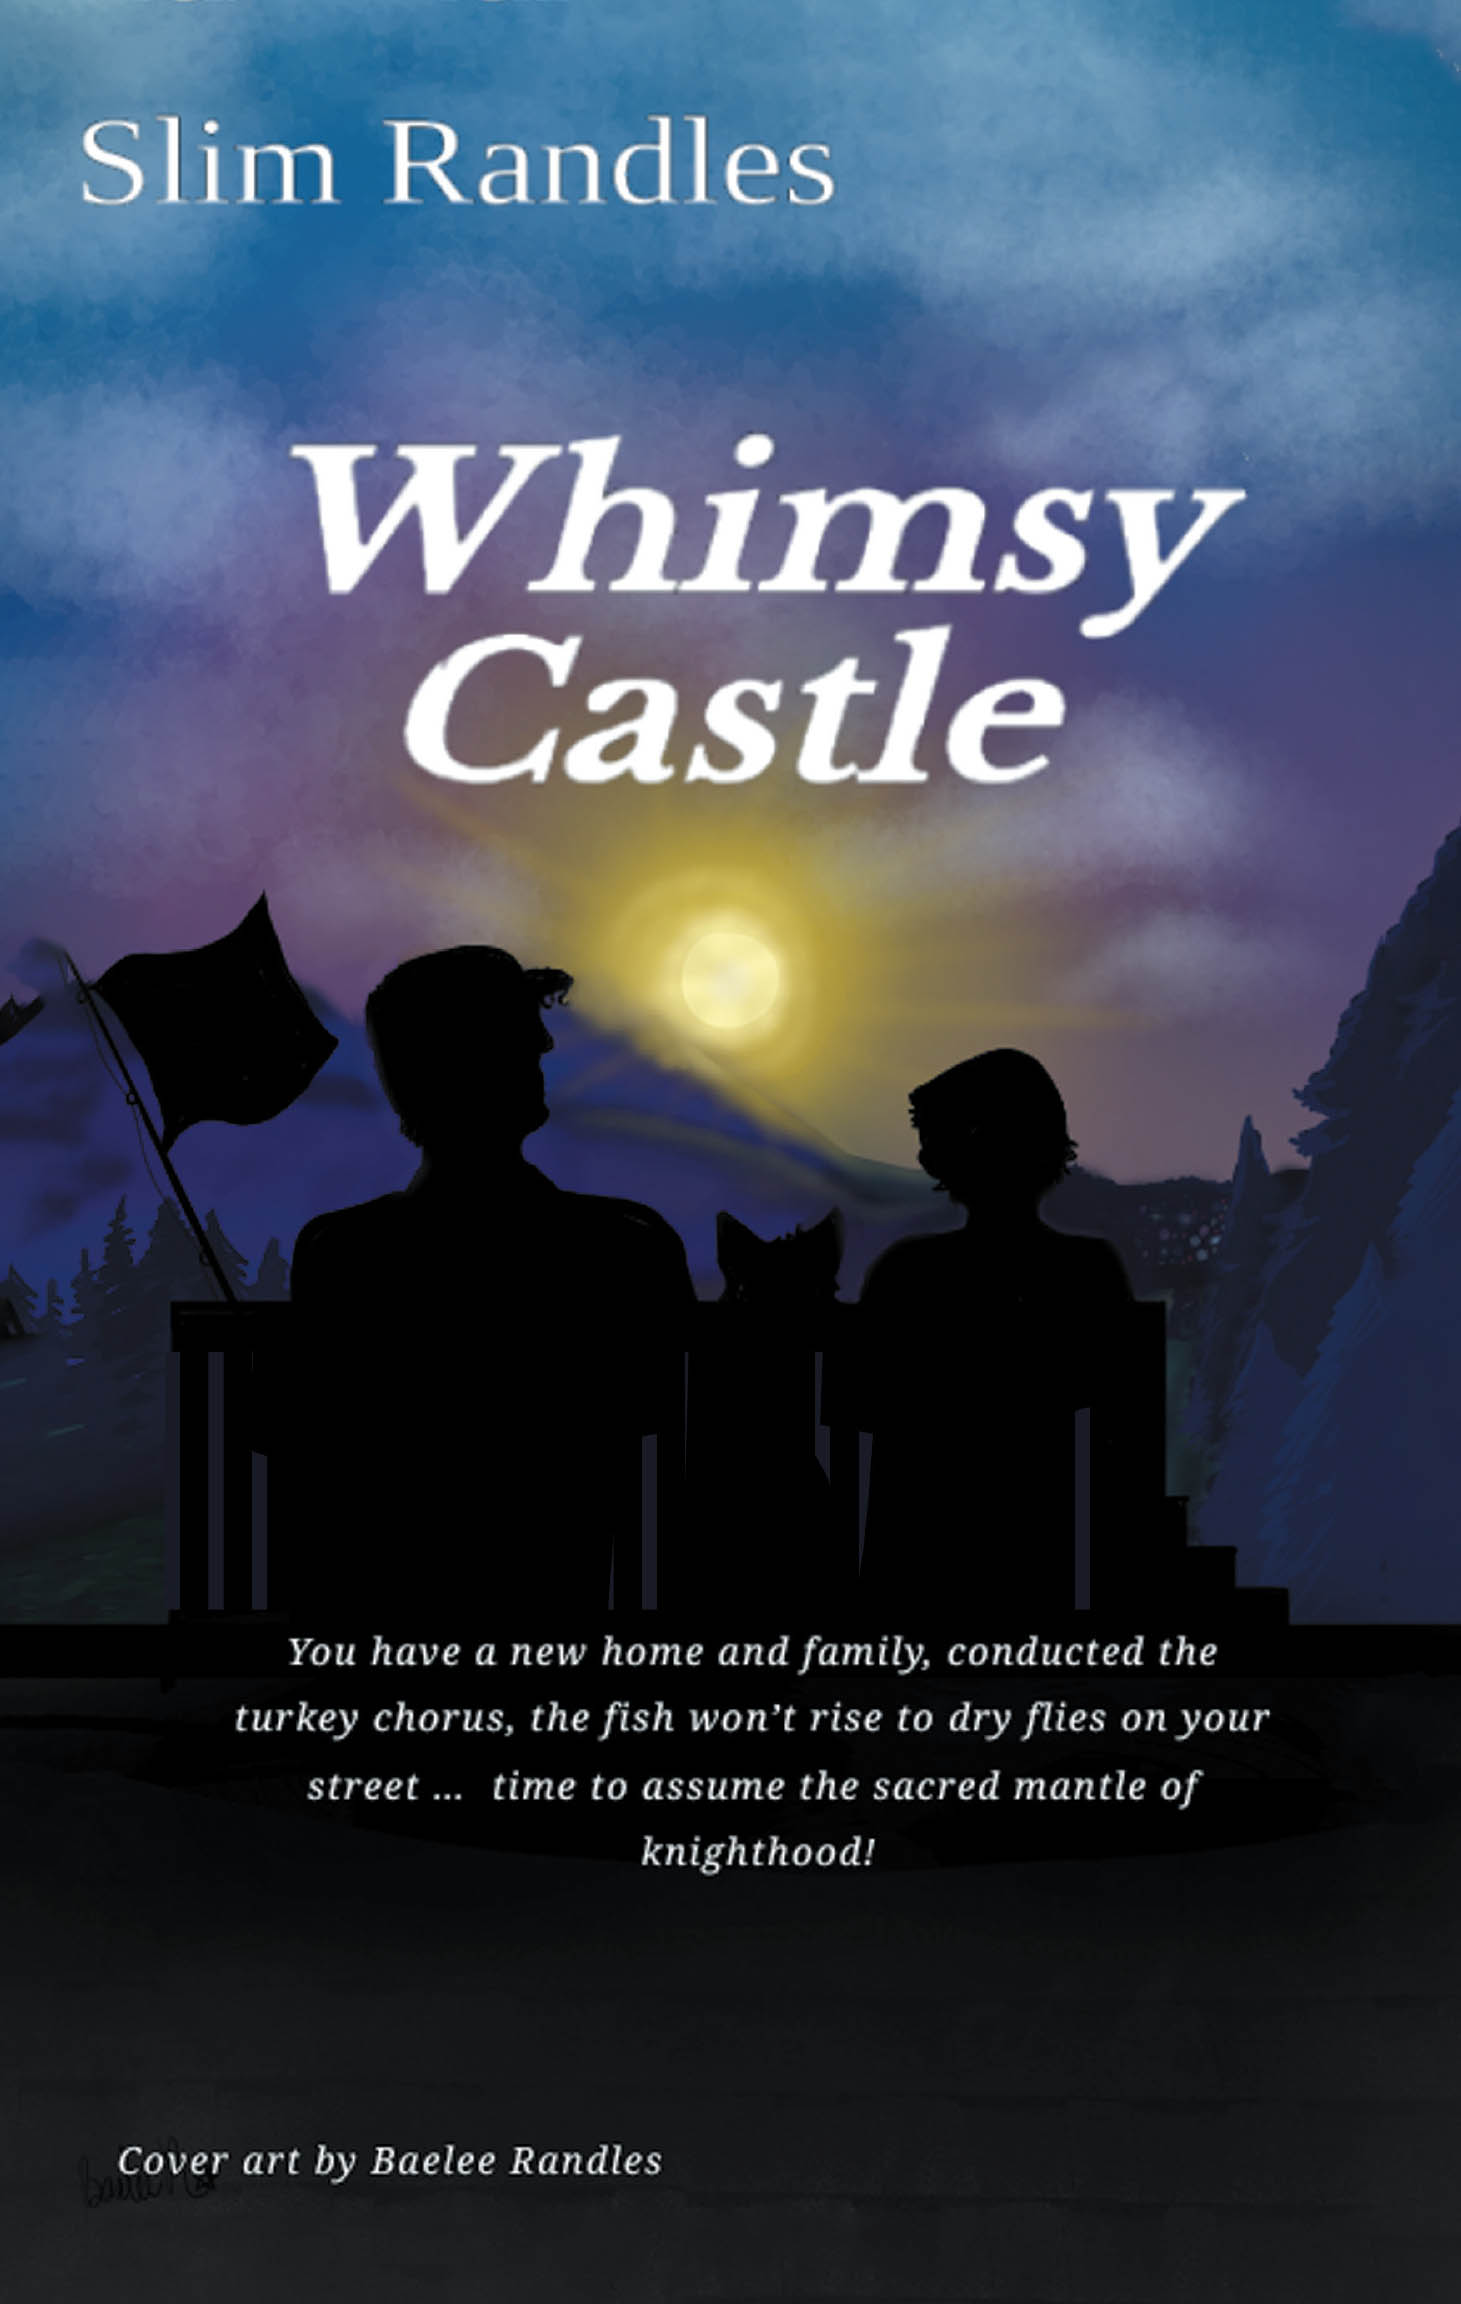 Author Slim Randles’s New Book, "Whimsy Castle," is a Compelling Novella That Focuses on the Changing Family Dynamic Introduced by the Addition of a New Stepfather